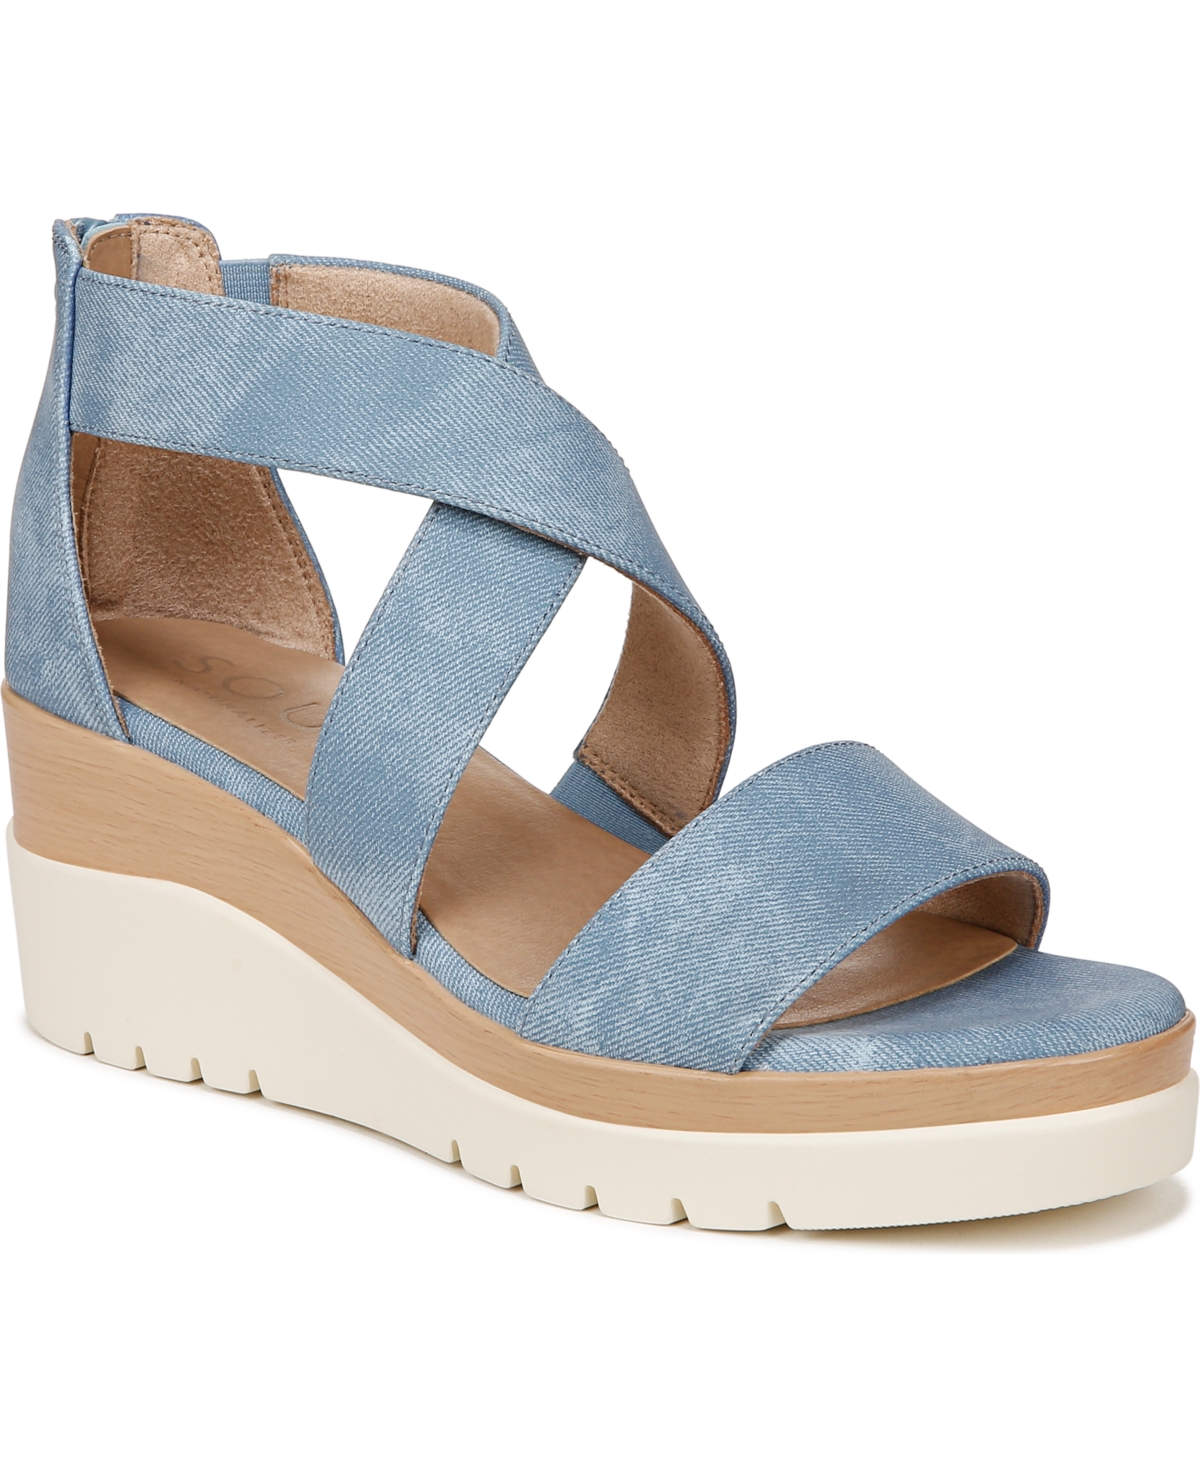 Goodtimes Ankle Strap Wedge Sandals - Mid Blue Faux Leather